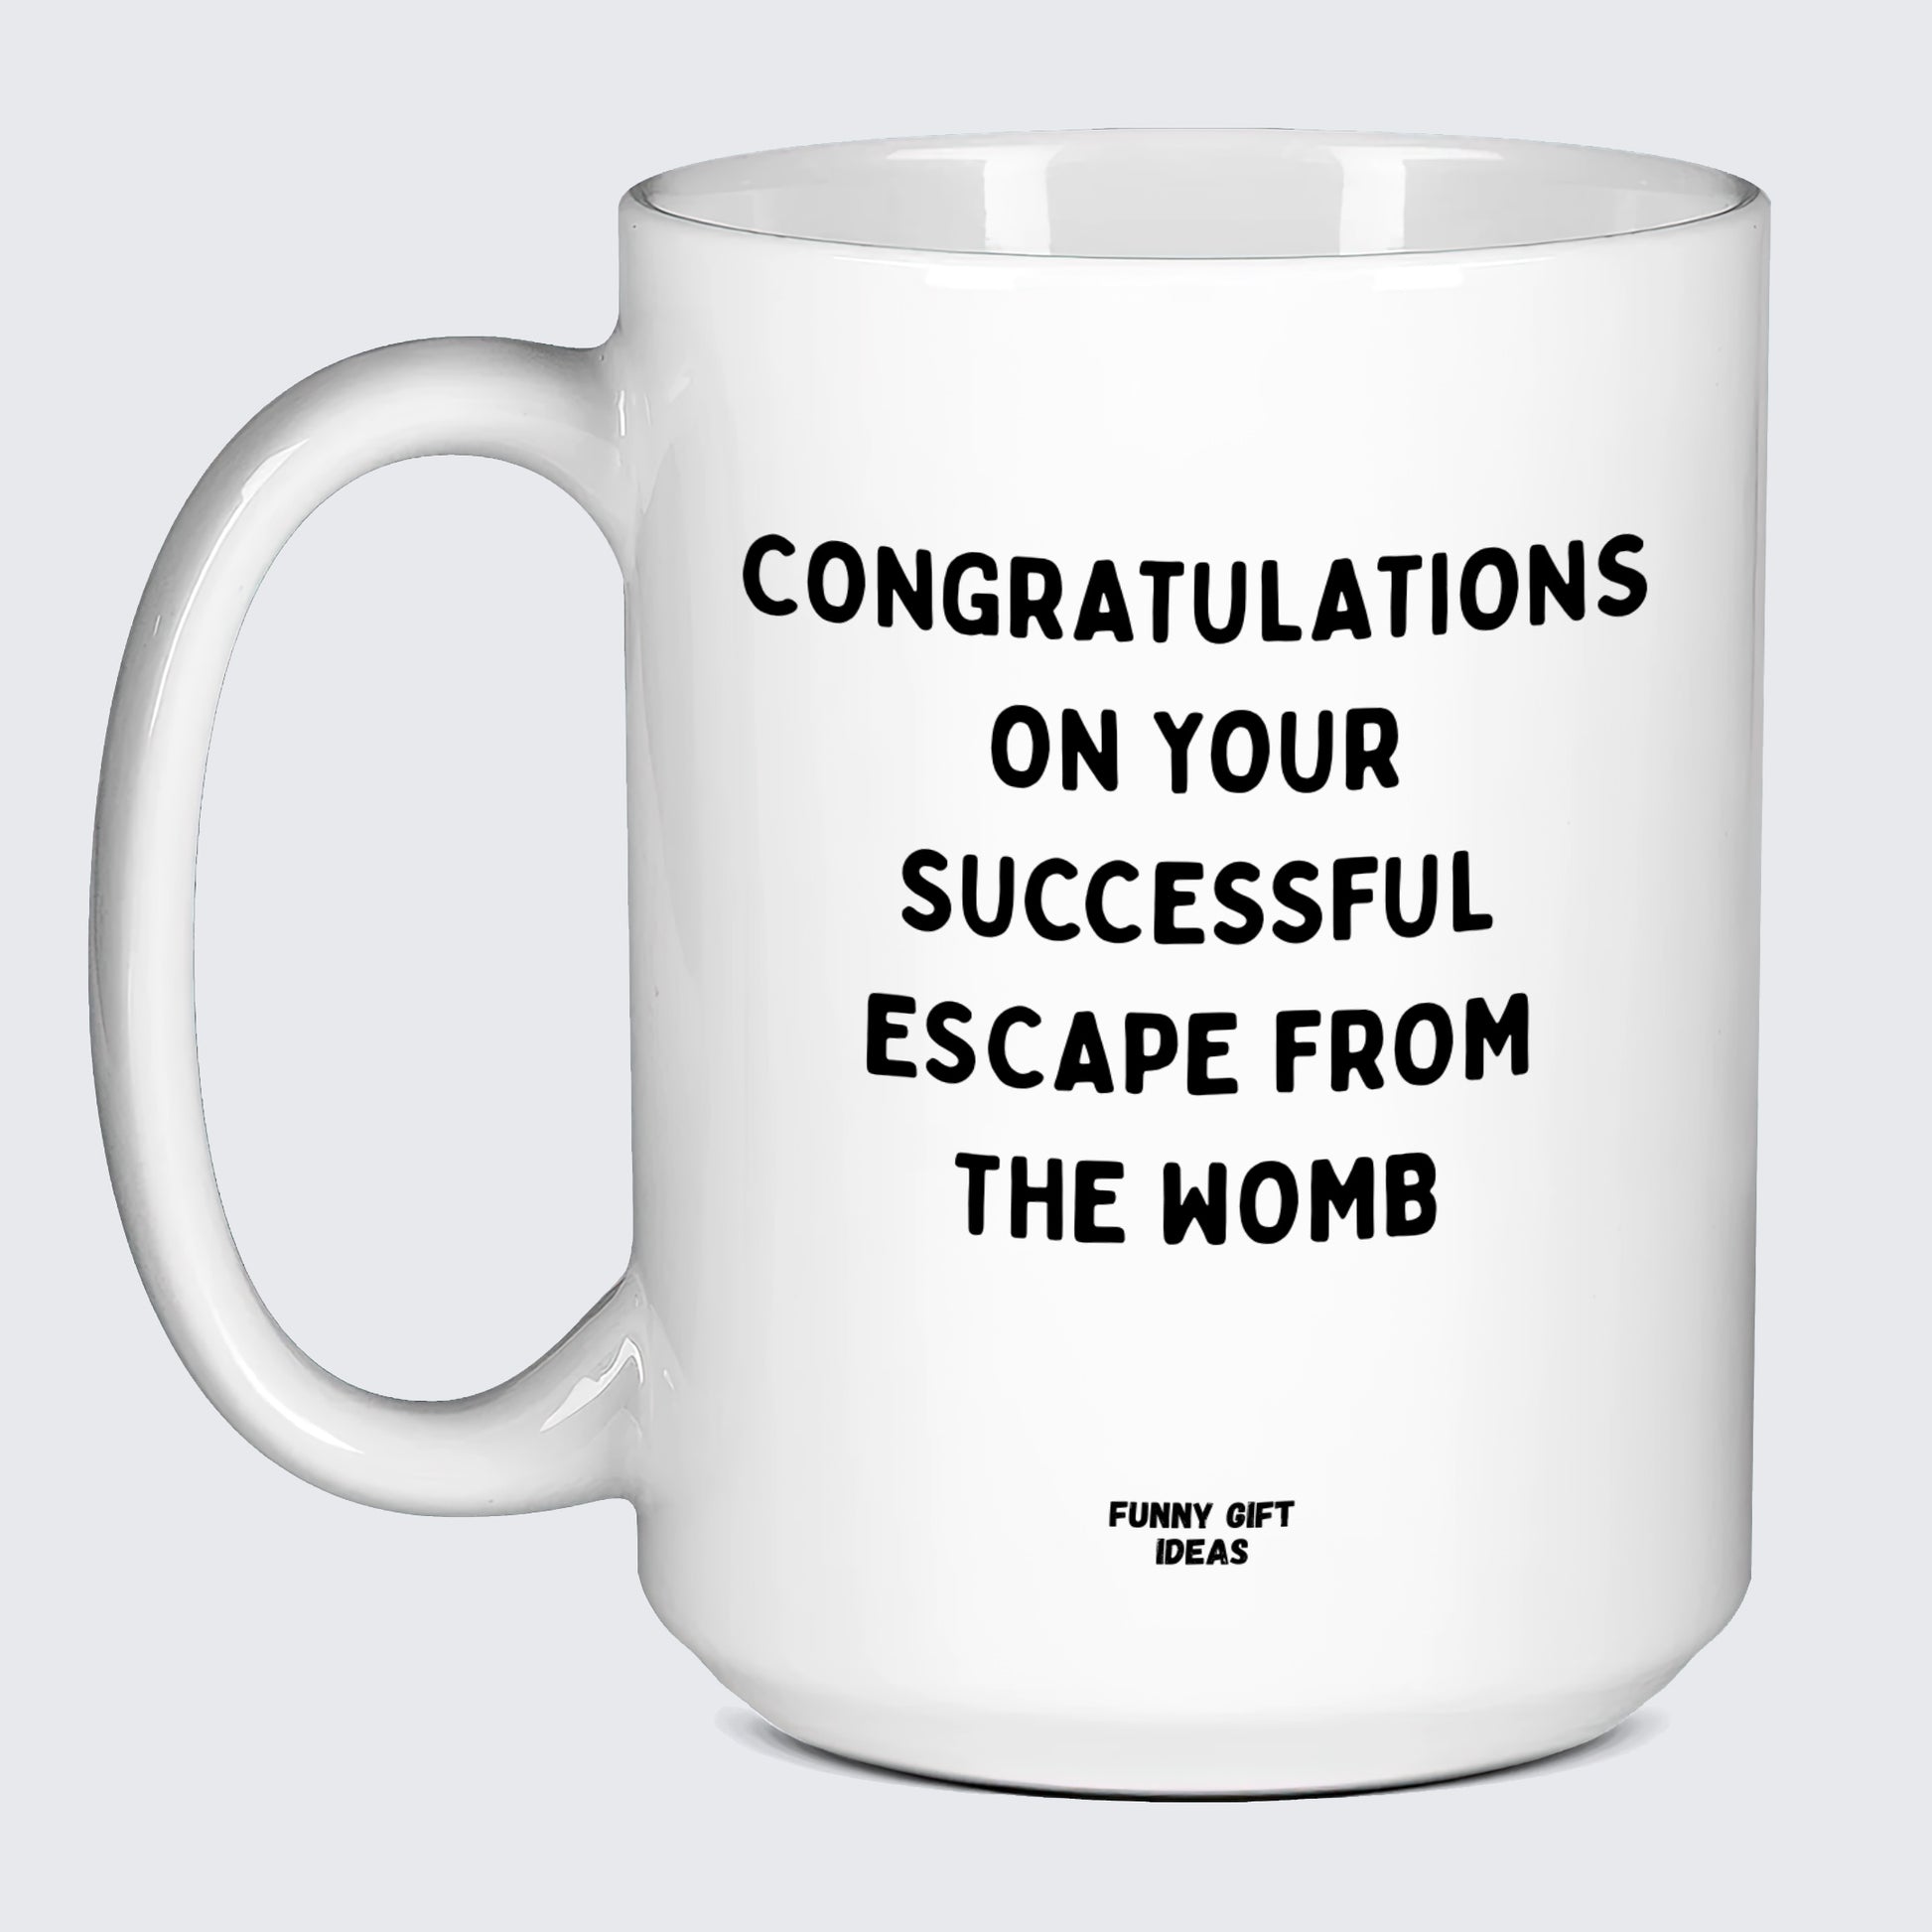 Birthday Present Congratulations on Your Successful Escape From the Womb - Funny Gift Ideas